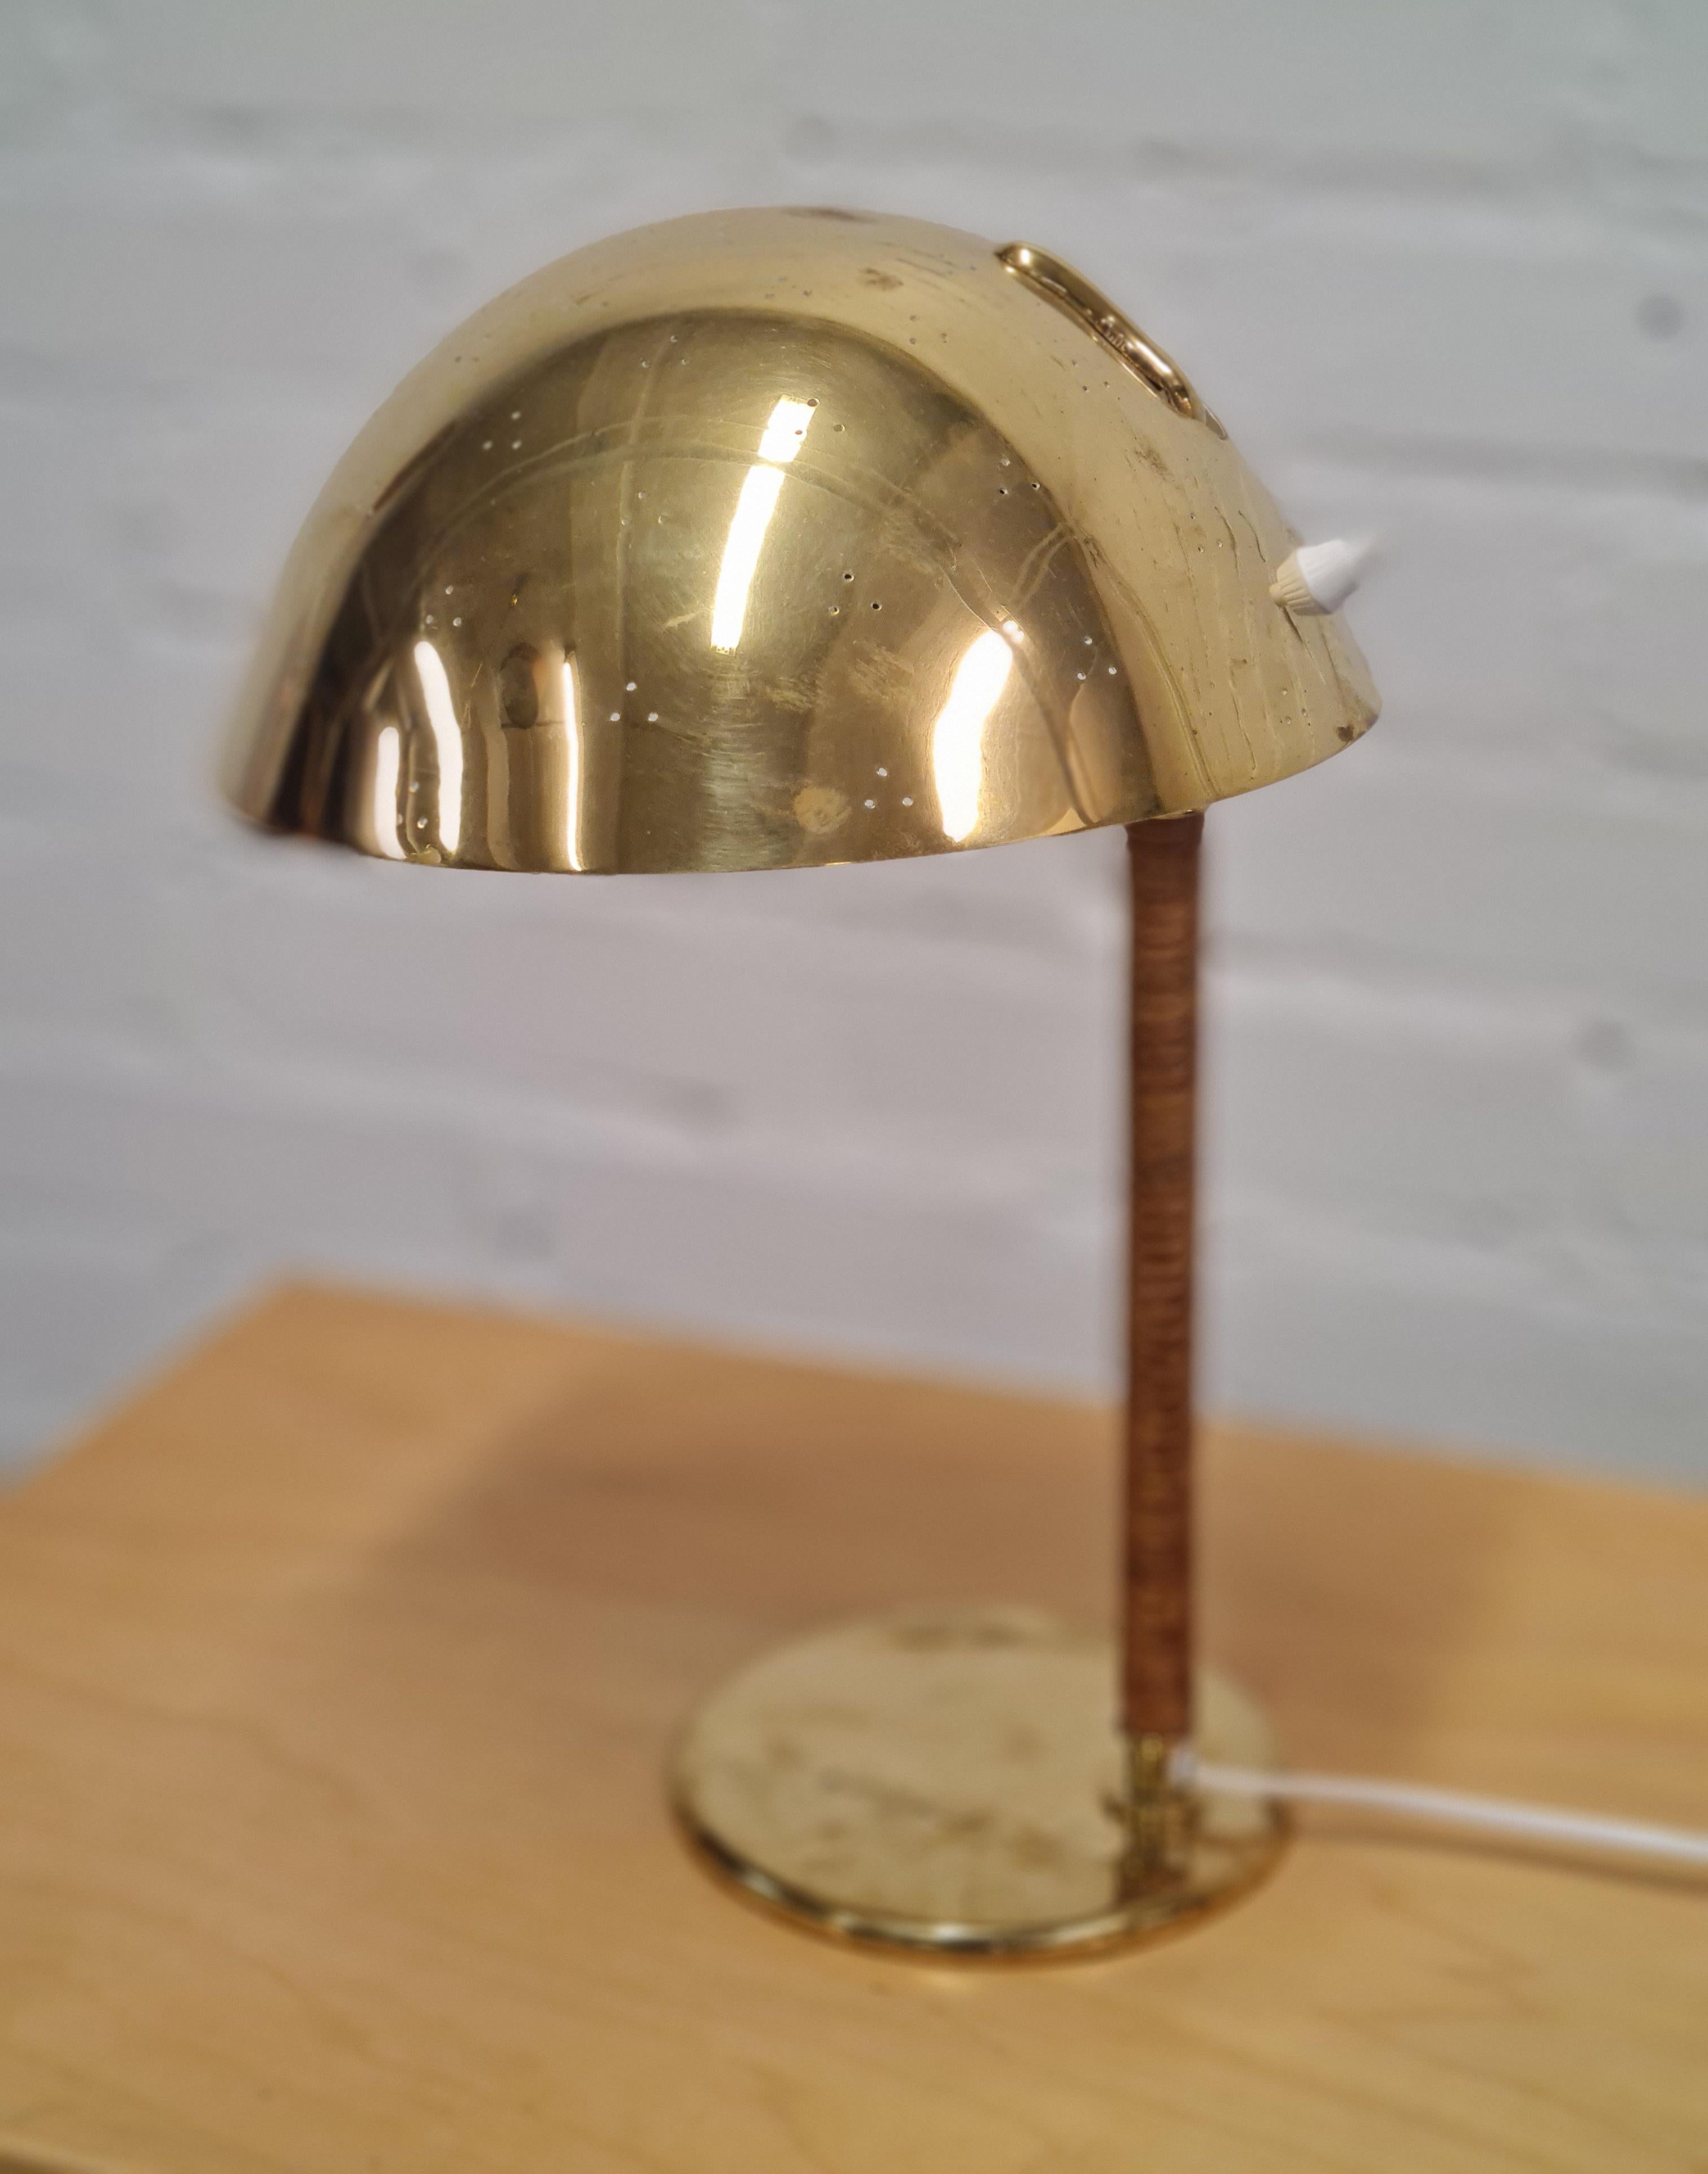 One of the most iconic Tynell table lamp designs. This large and elegant table lamp nicknamed the `Helmet´ or `Kypärä´ in Finnish, is amongst the most desired ones. 
The simplicity of the lamp makes it stand out. 
This particular lamp comes in great